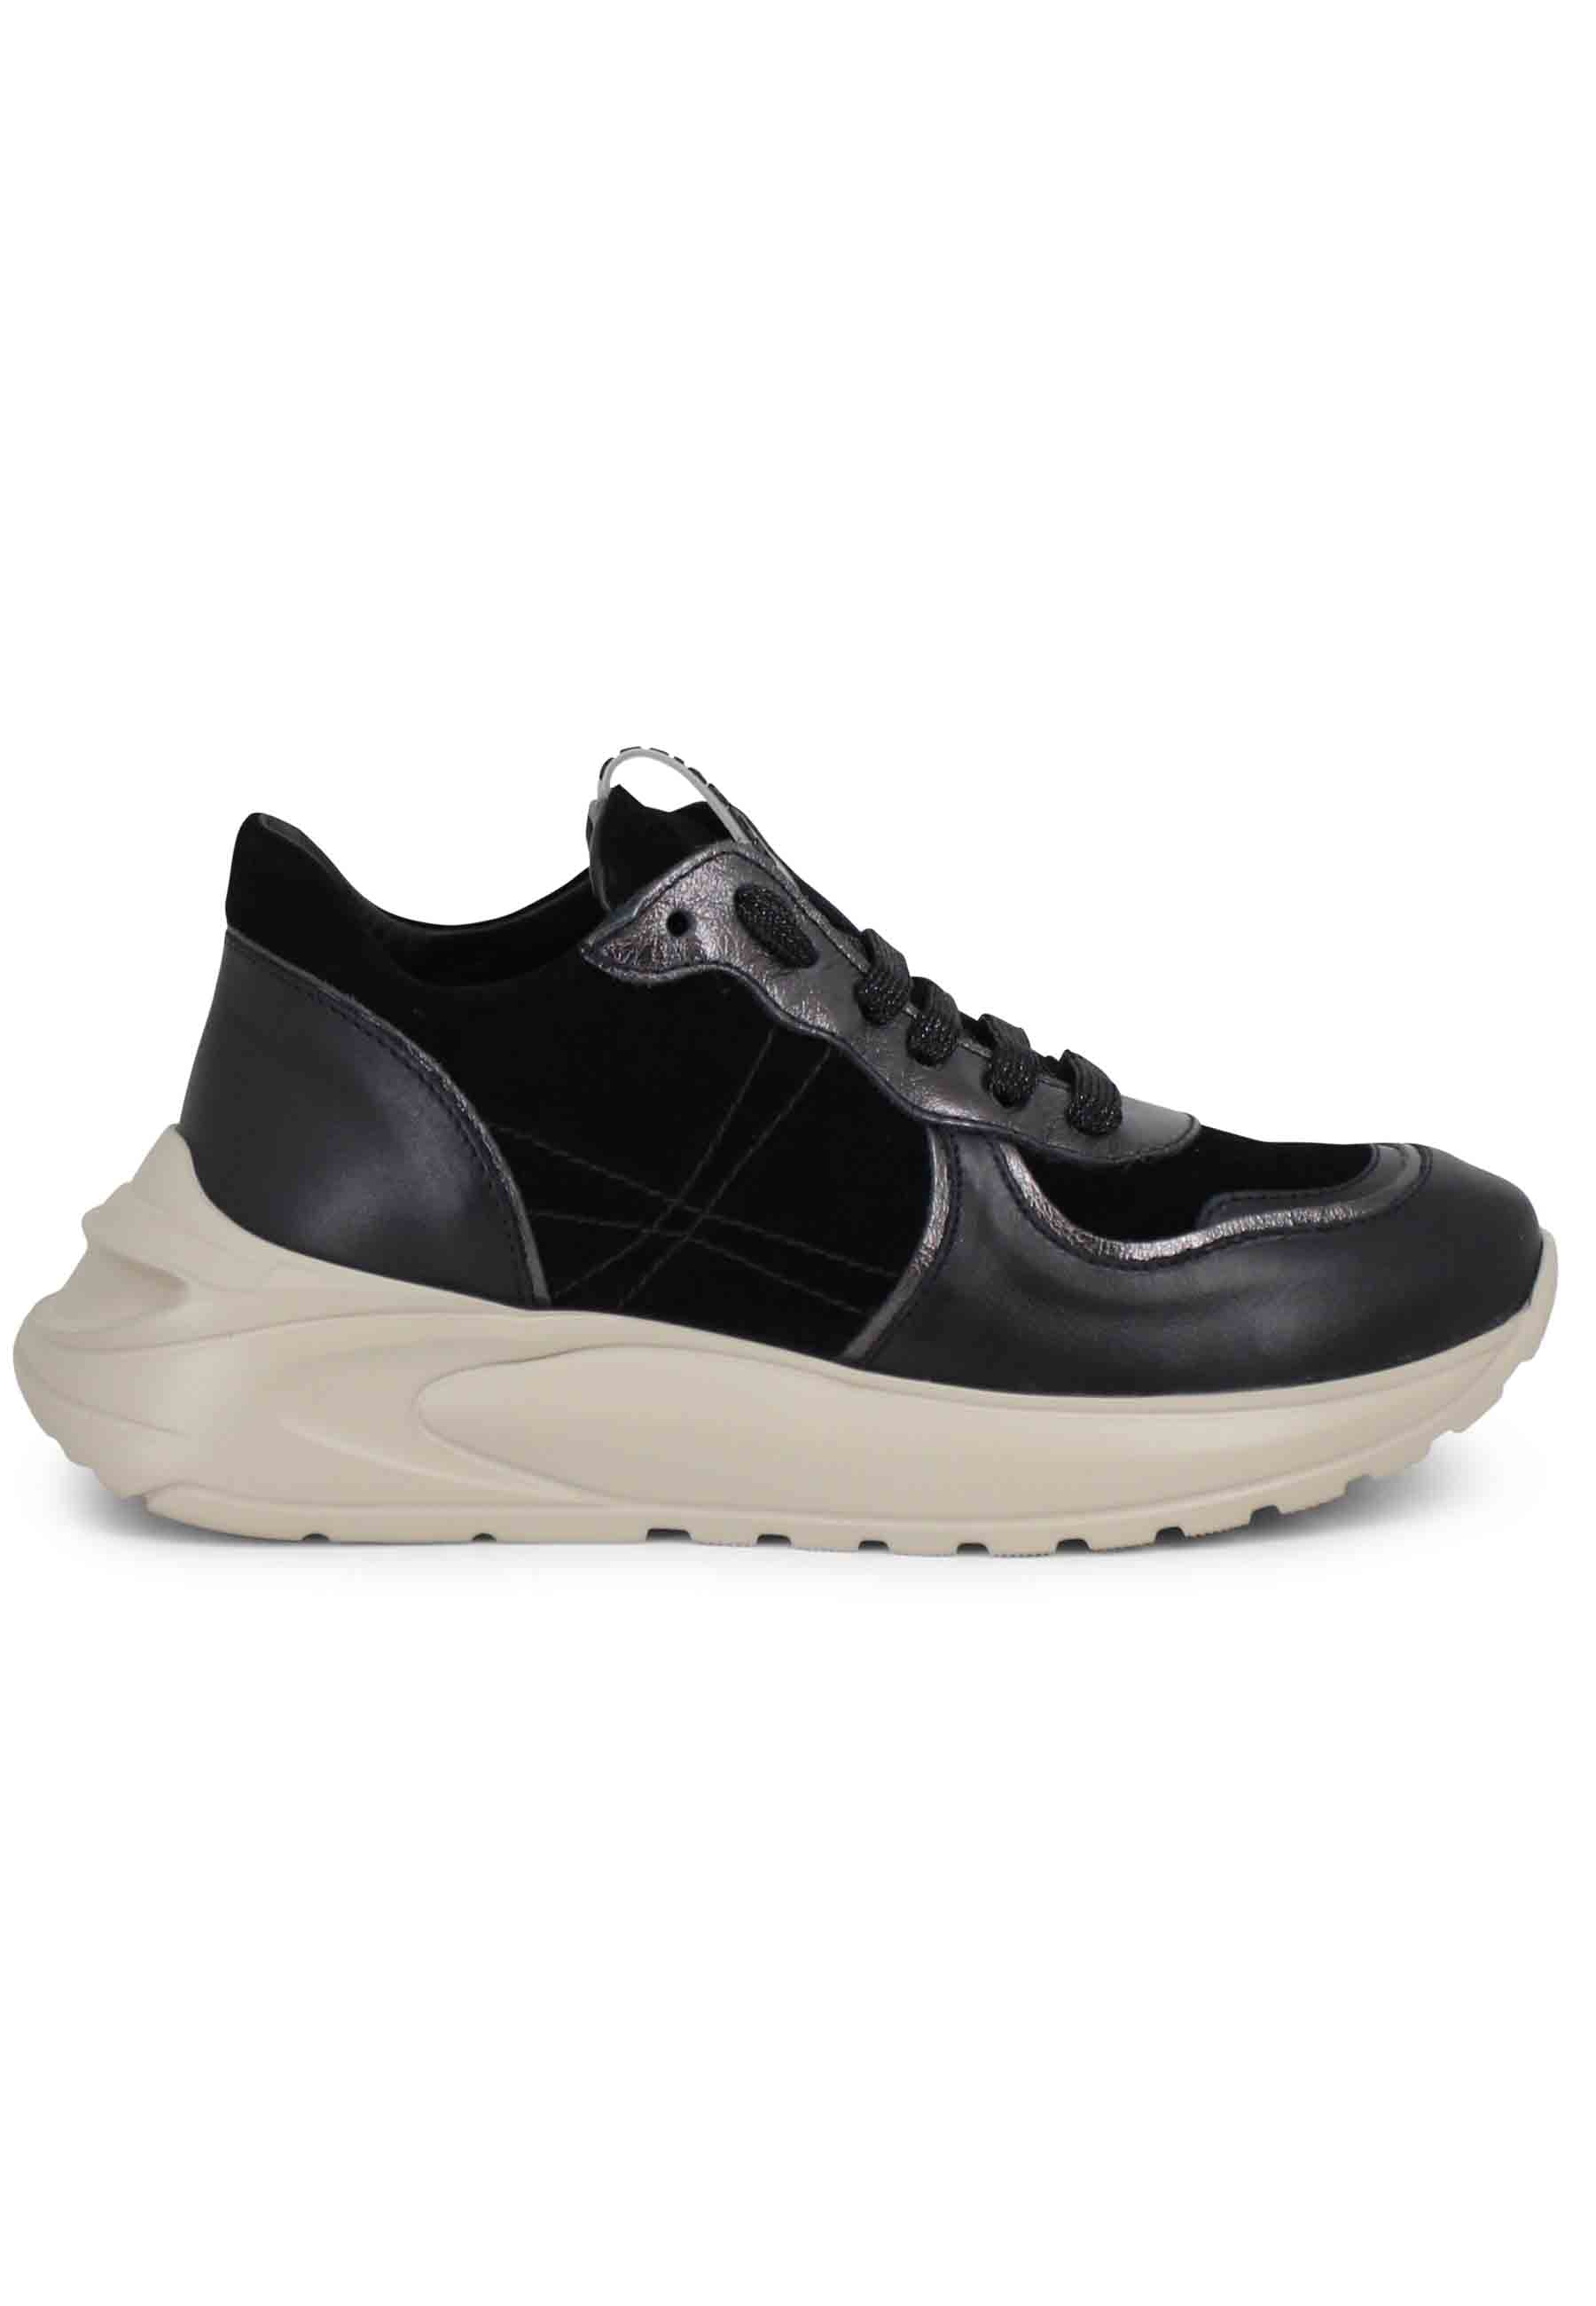 Women's black leather sneakers with rubber sole